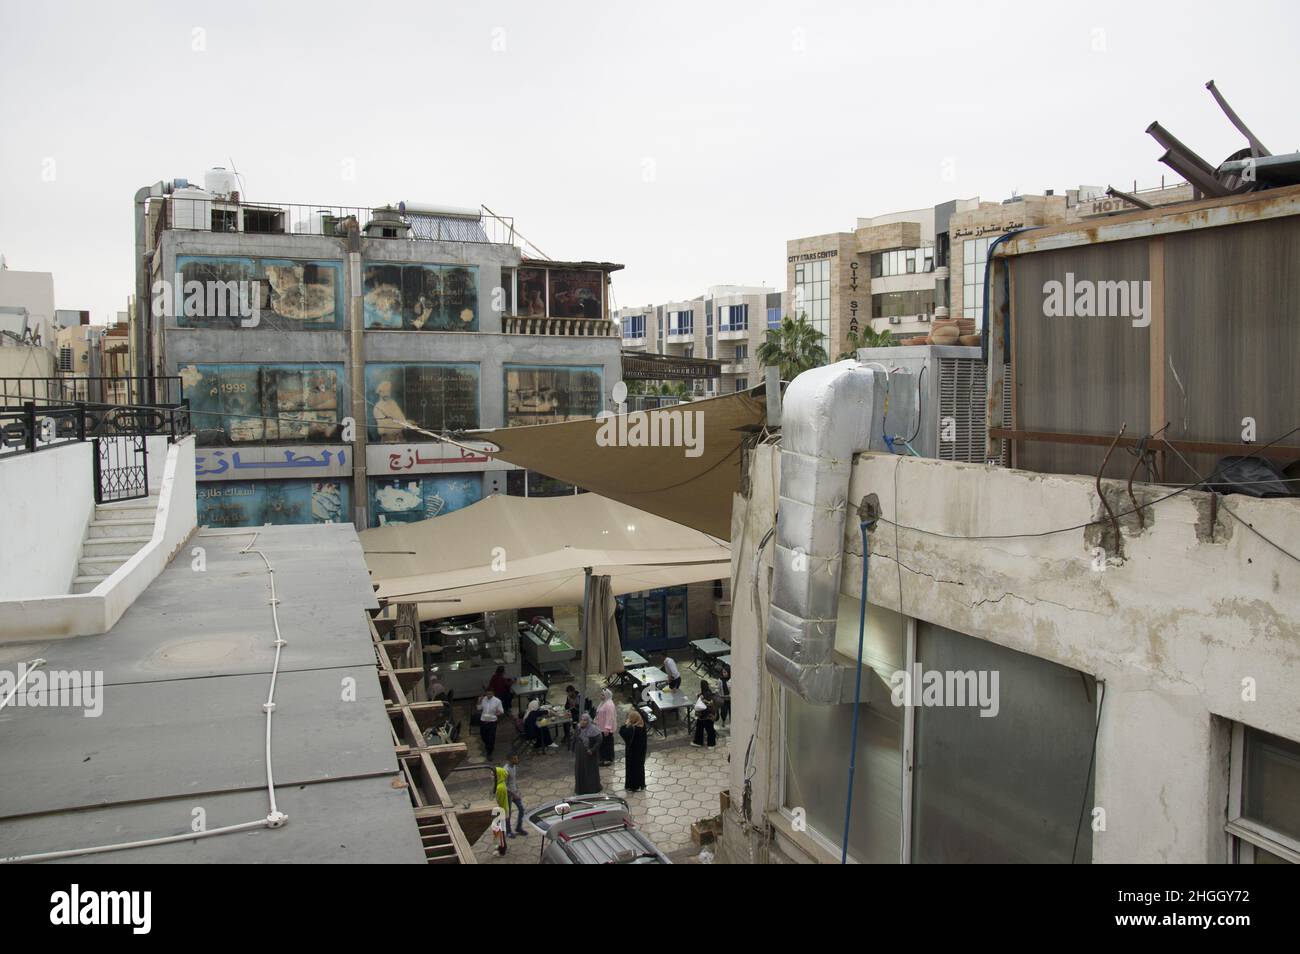 Faded and windswept billboards on a building in Aqaba Jordan depicting bread making and a restaurant and Arabic writing and torn awnings. Stock Photo